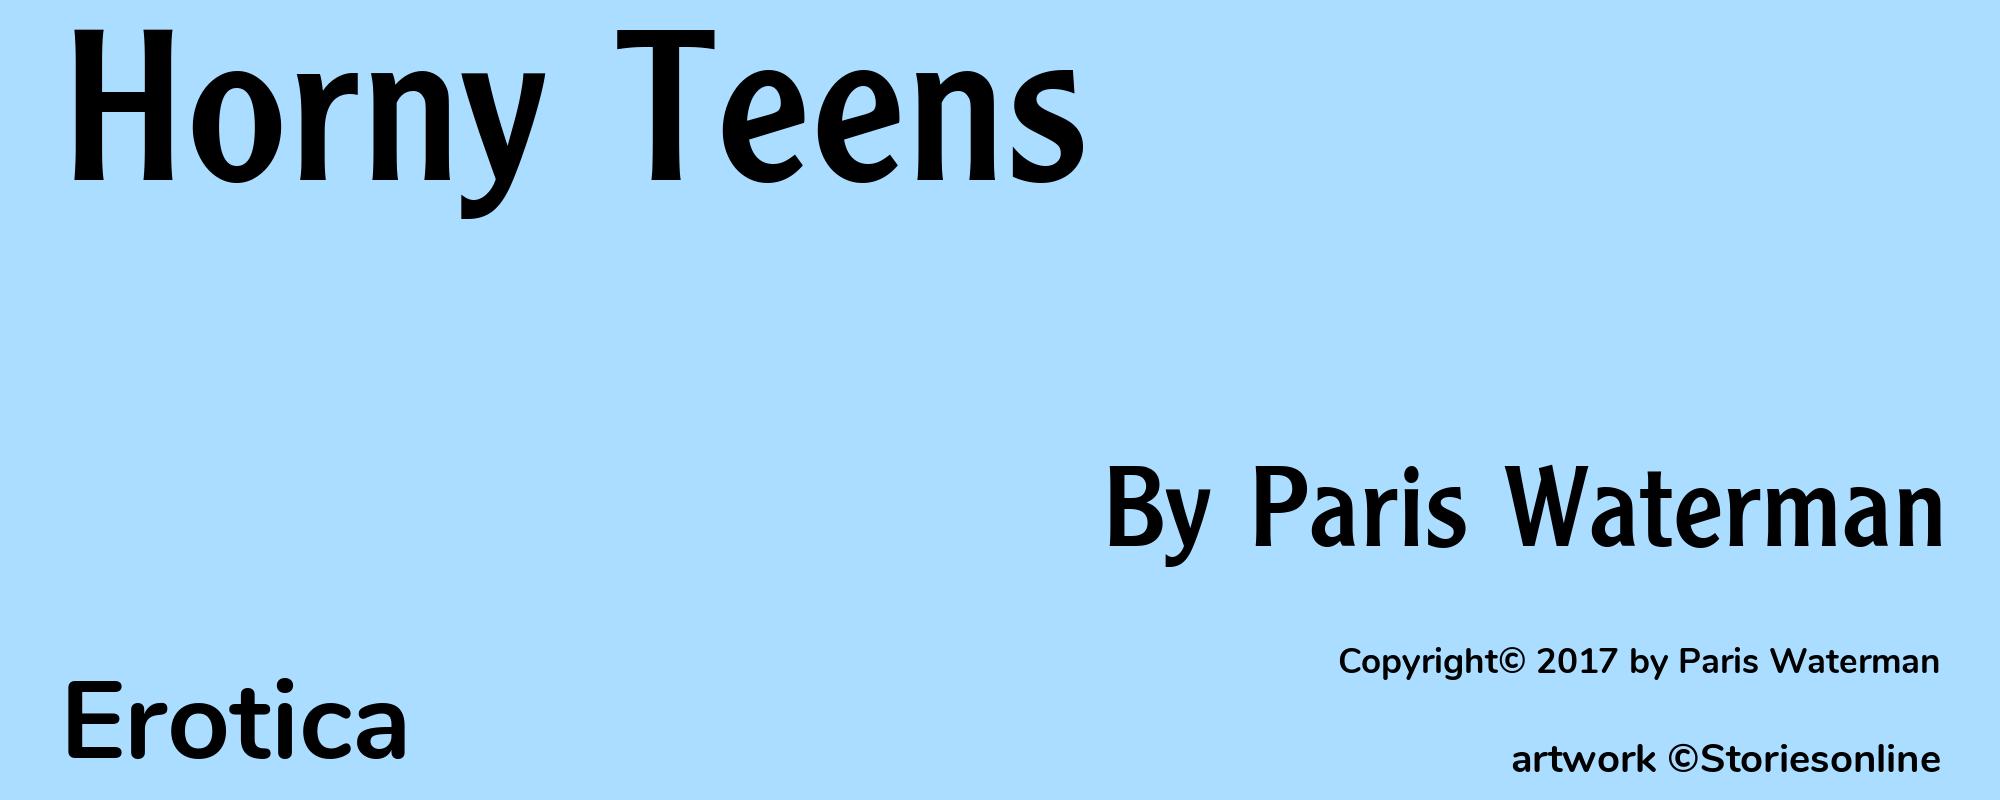 Horny Teens - Cover